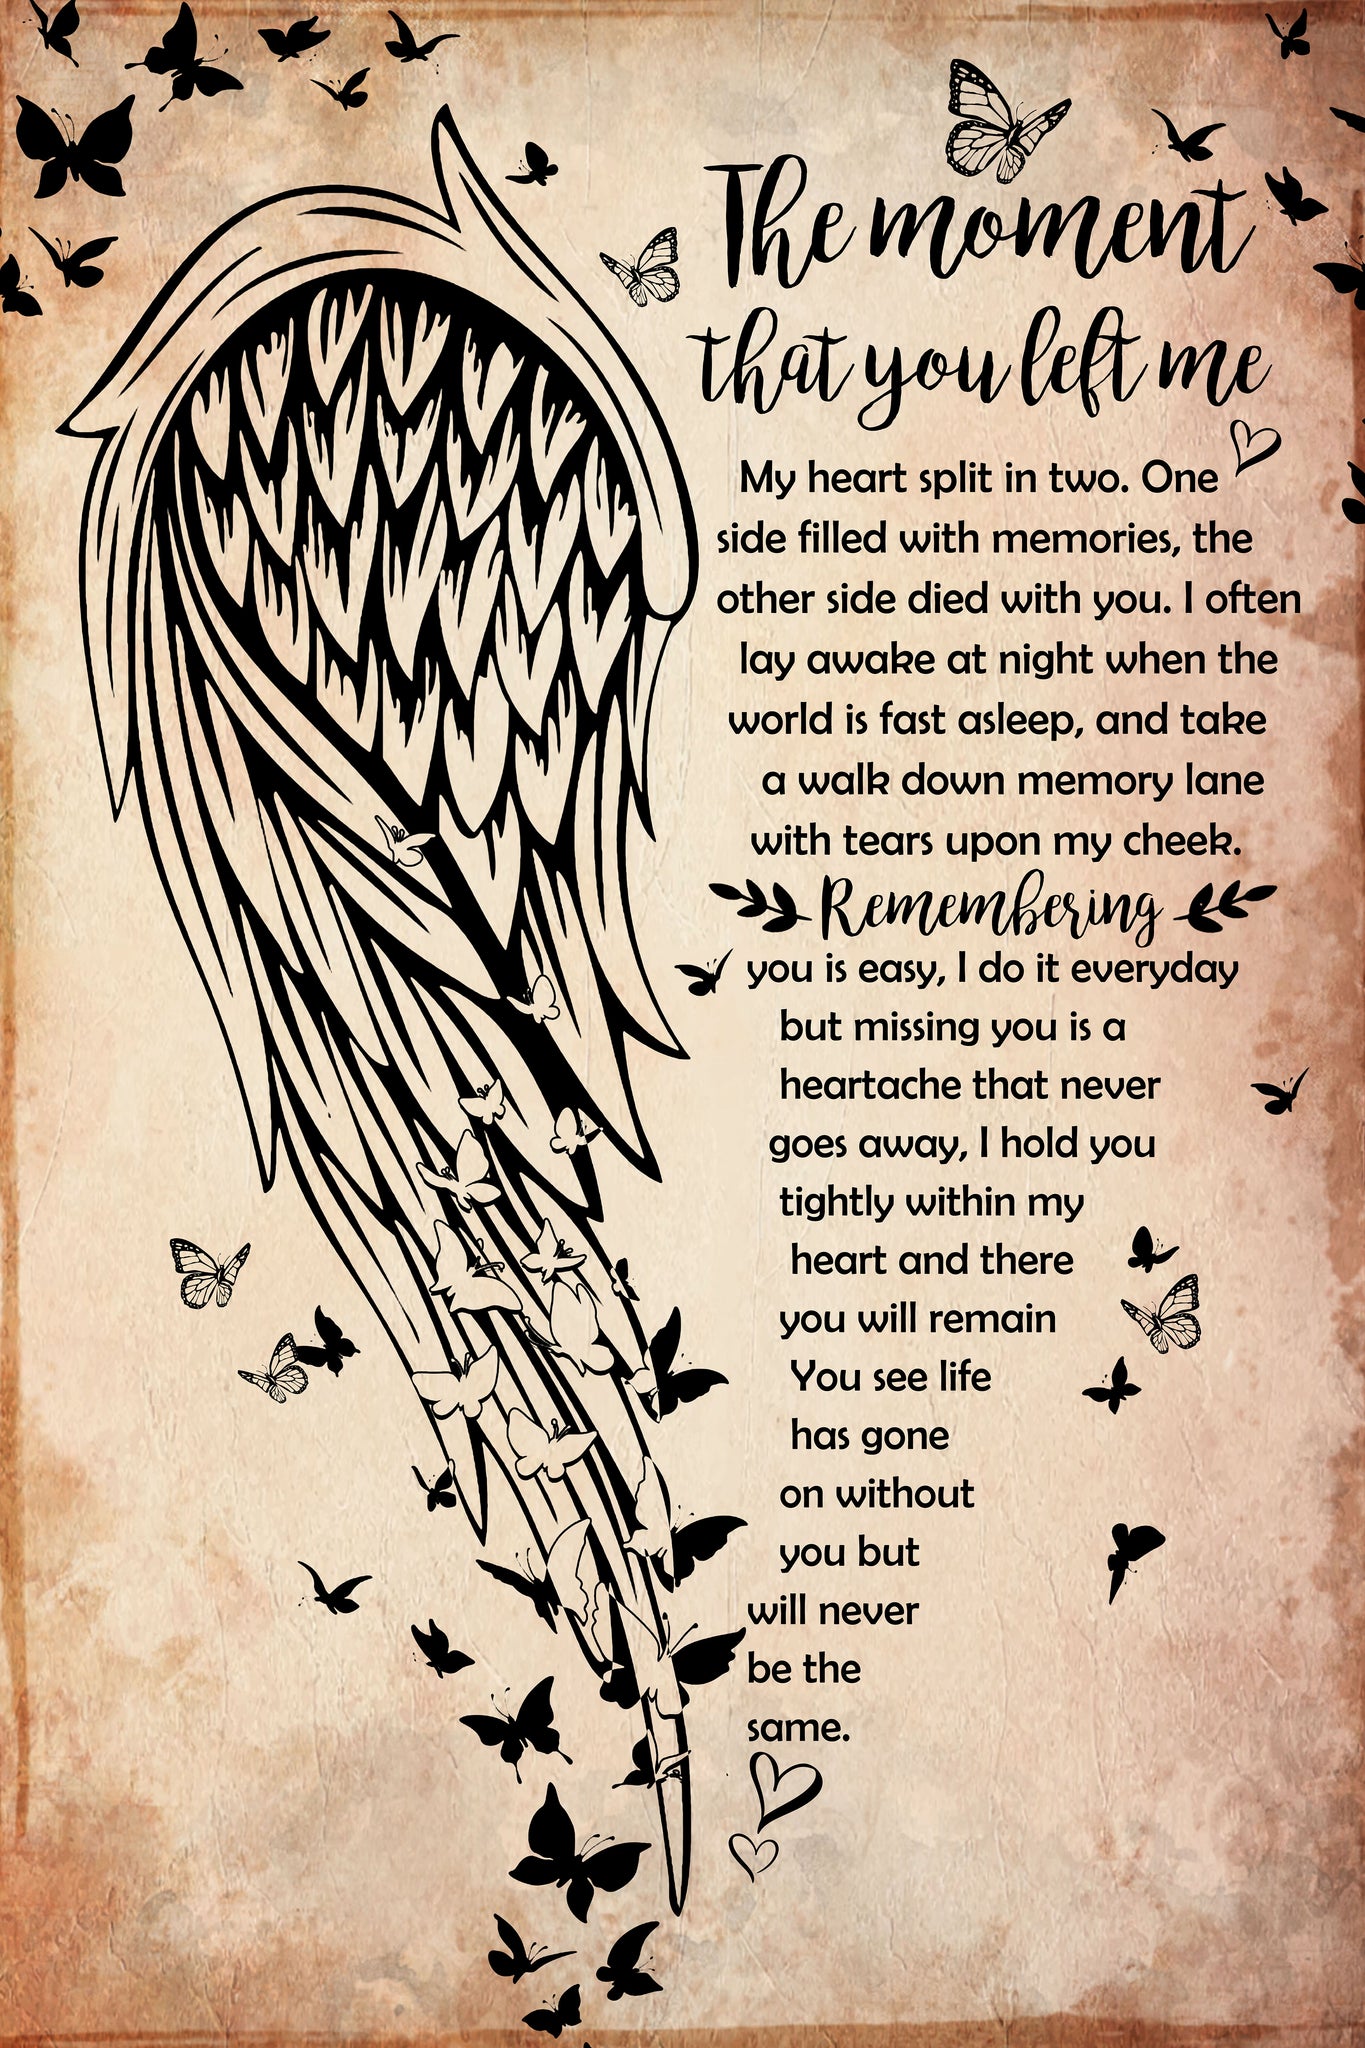 Skitongifts Wall Decoration, Home Decor, Decoration Room The Moment That You Left Me My Heart Split In Two Life Has Gone Without You Angel Wings